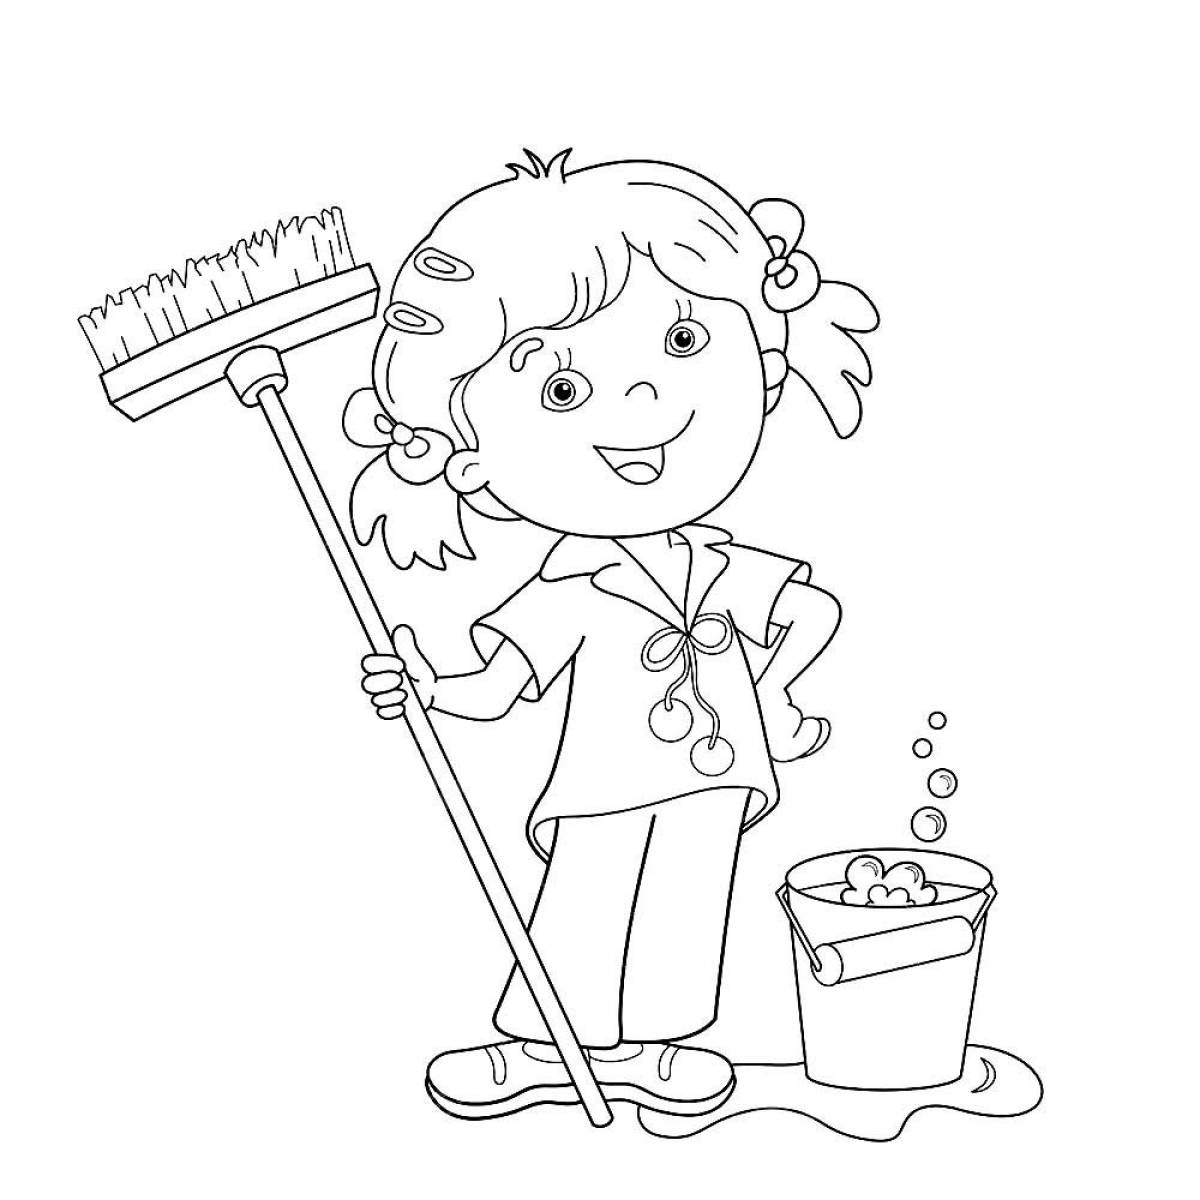 House cleaning for kids #22